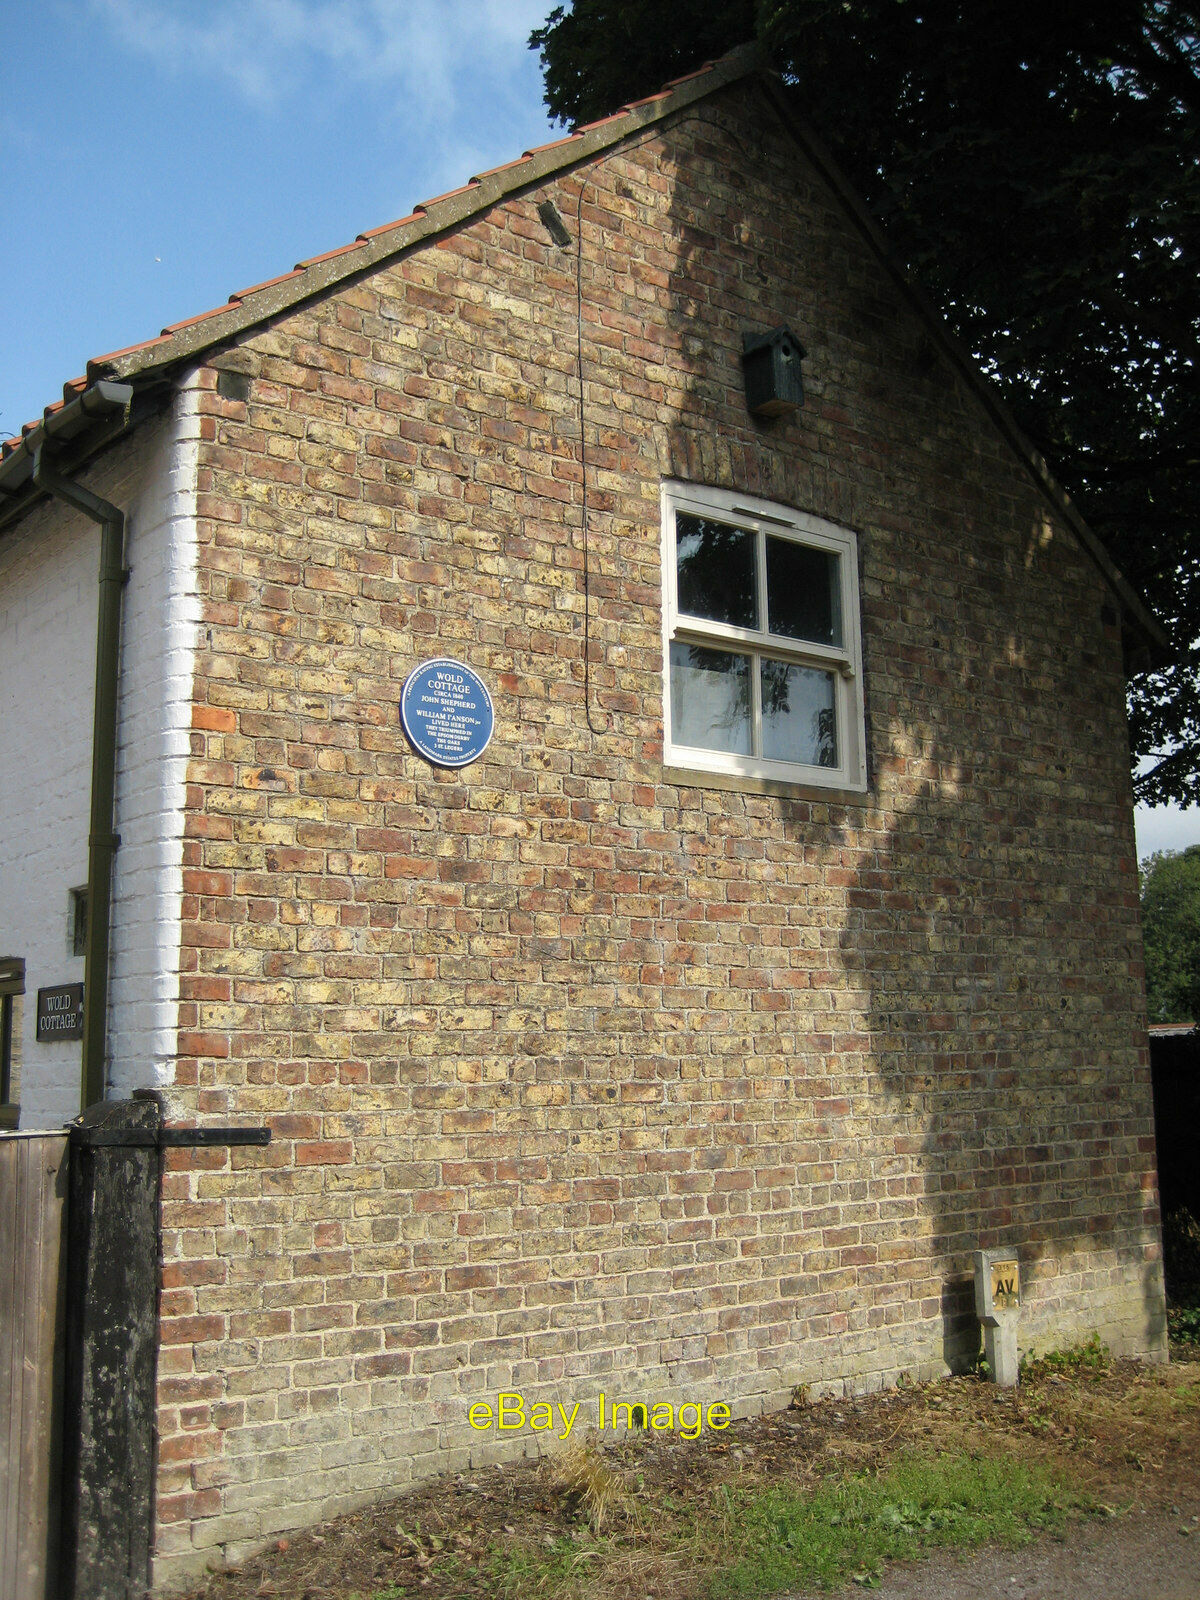 Photo 6x4 Cottage with blue plaque Wold Cottage circa 1840 home to two su c2013